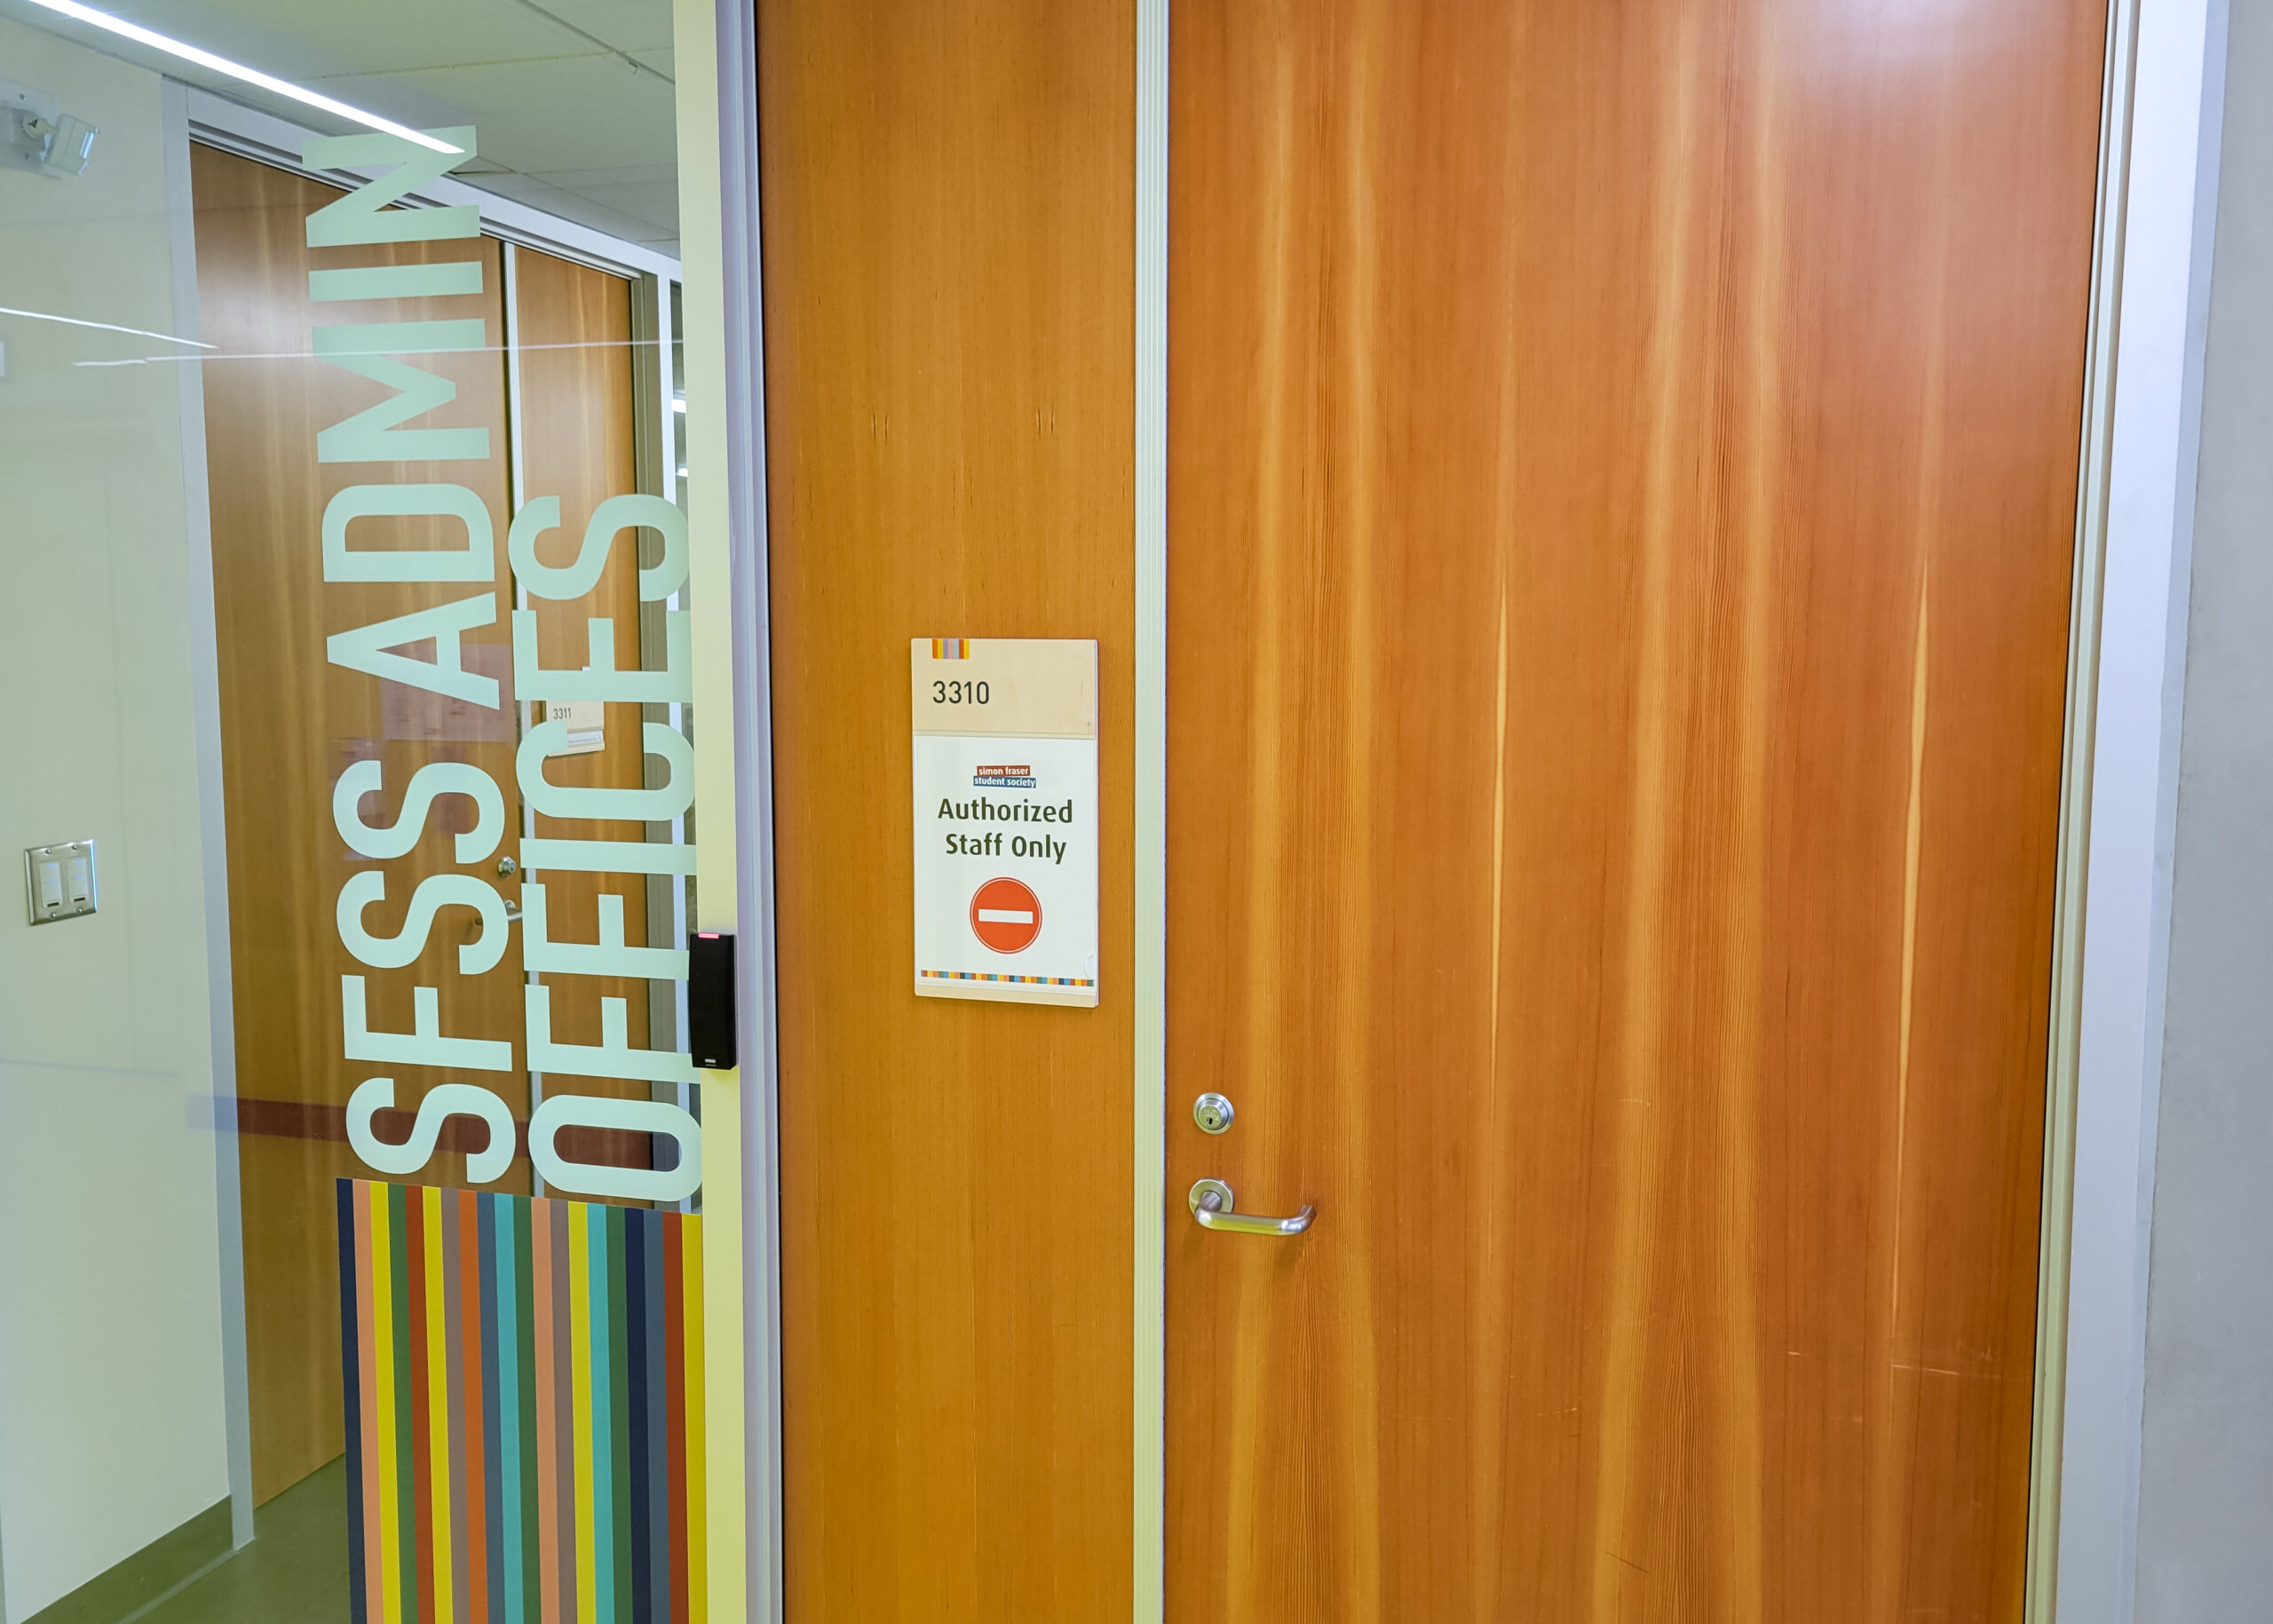 This is a photo of the outside of the SFSS offices in the Student Union Building. On the window there is a sign that reads “SFSS Admin Offices, authorised staff only.”